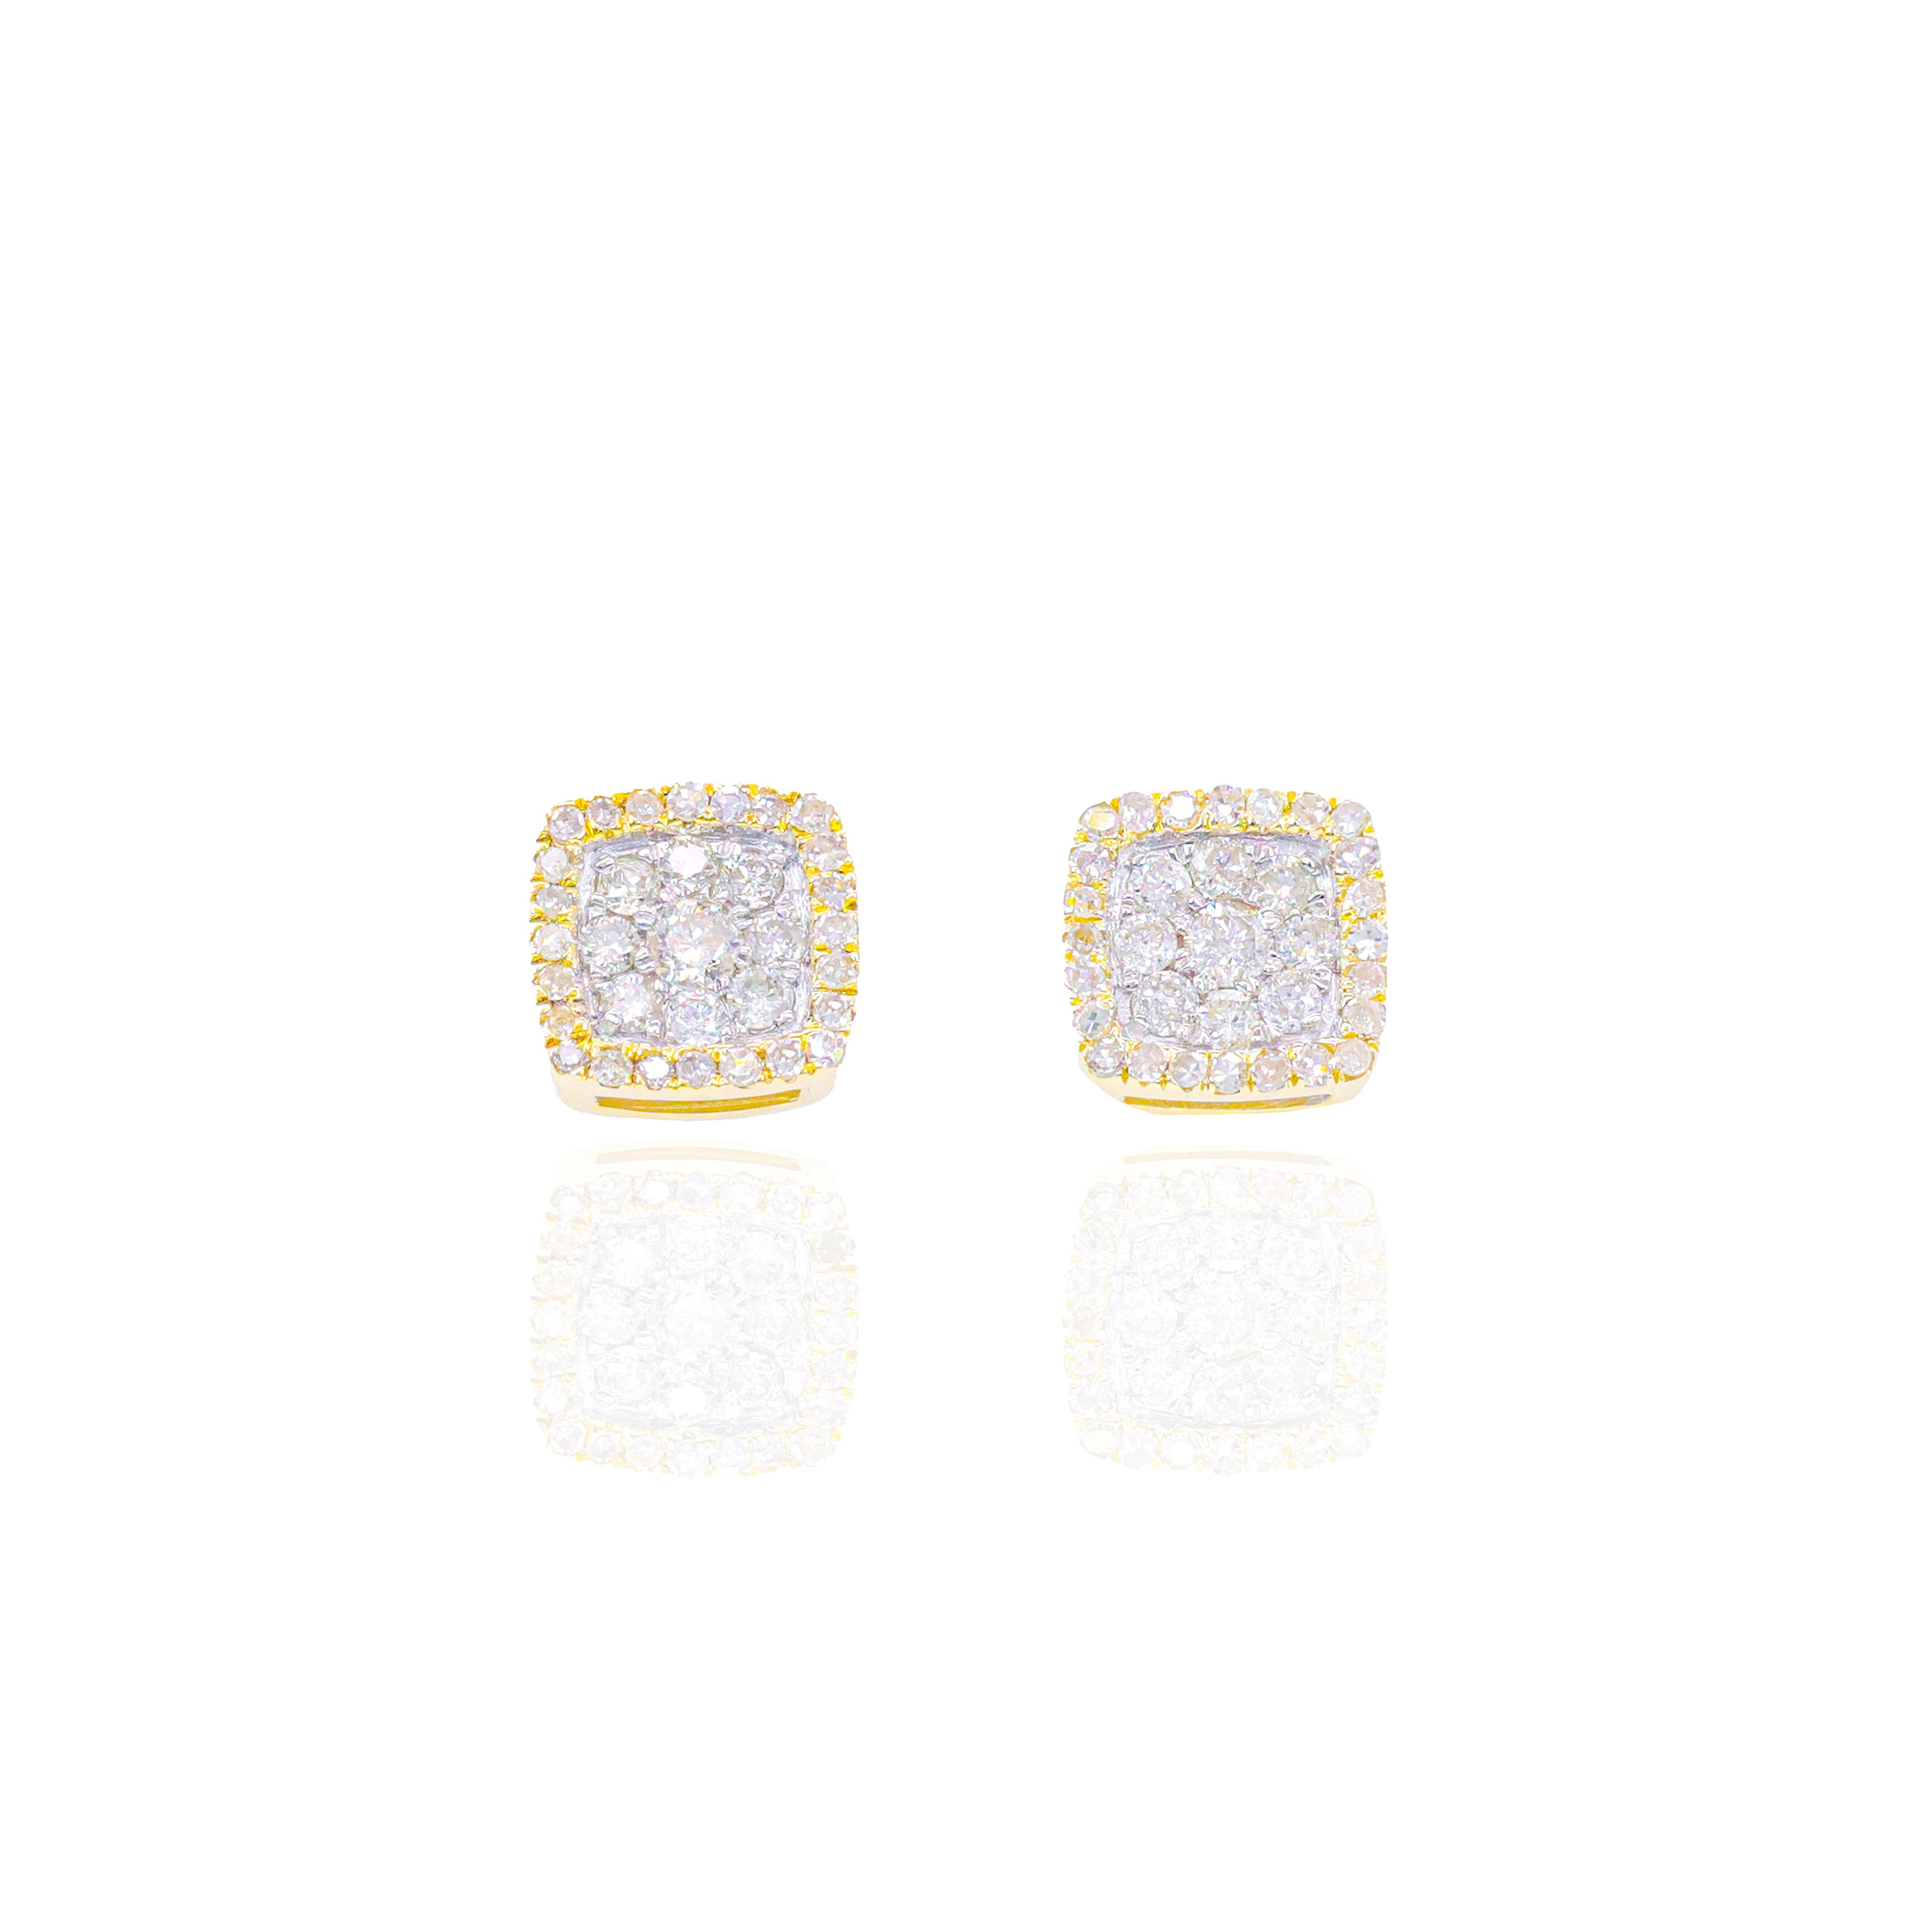 Two-Tone Square Diamond Cluster Earrings